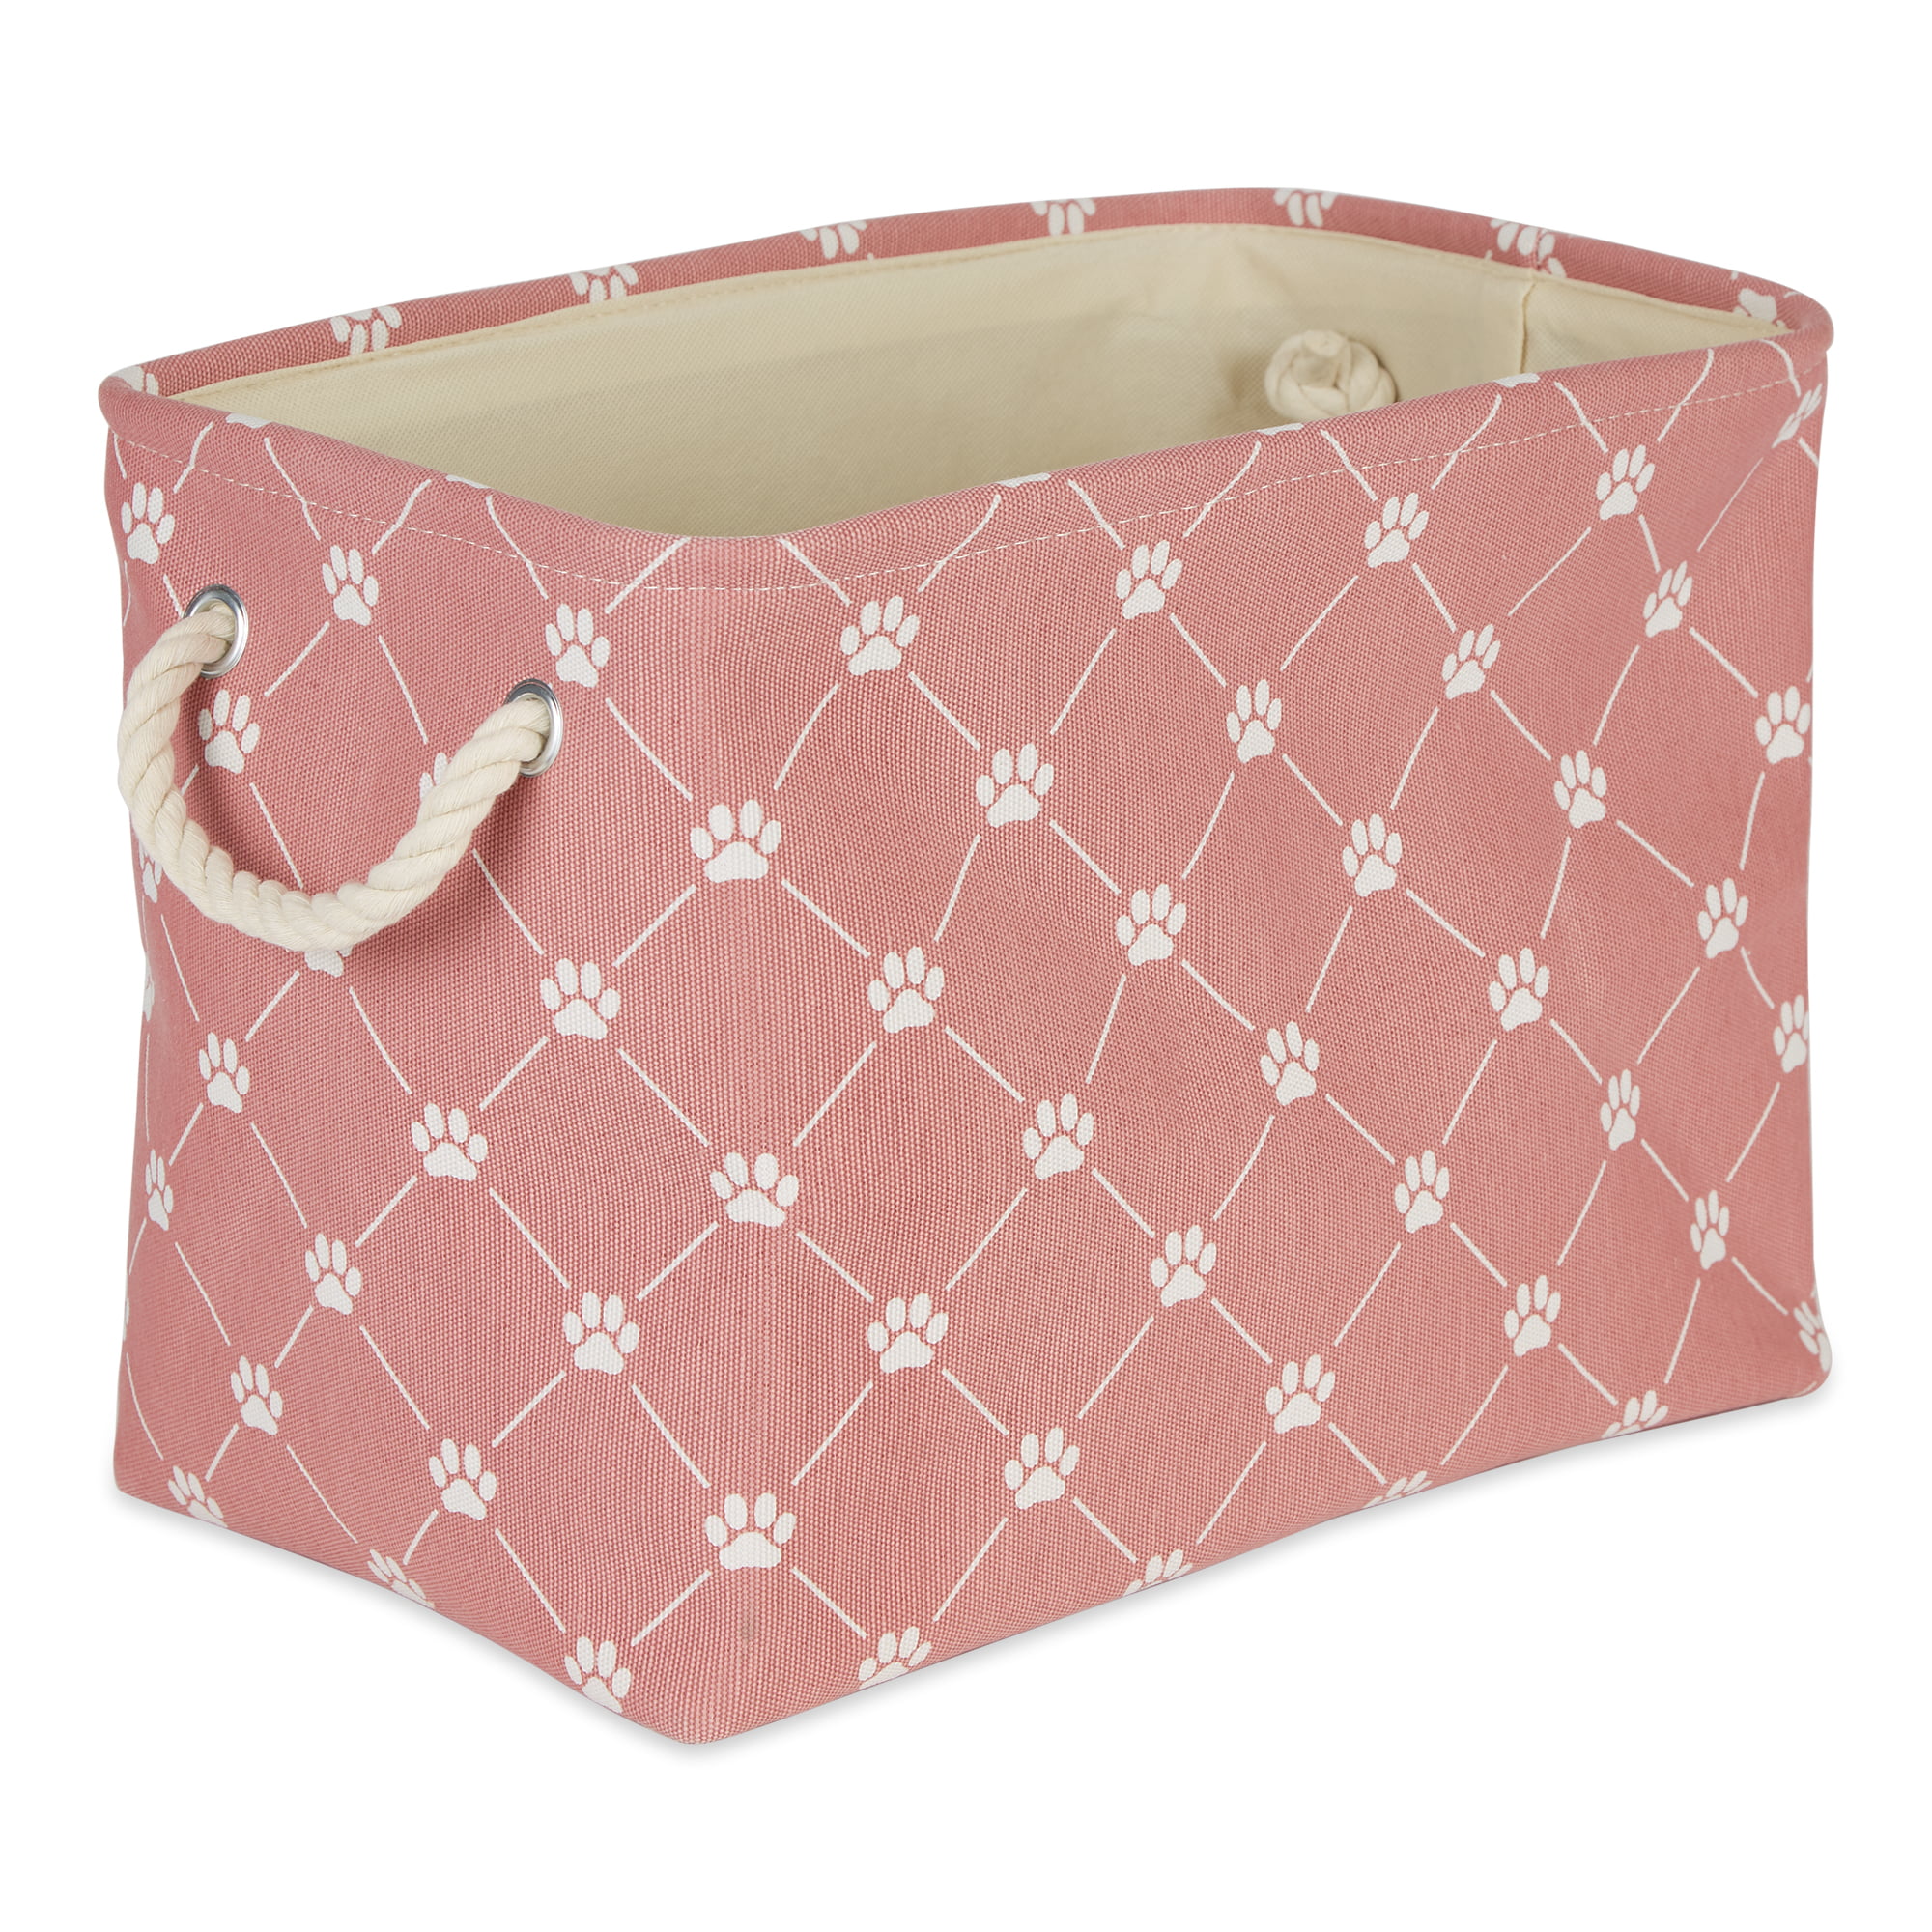 Picture of Design Imports CAMZ14247 Polyester Trellis Paw Rectangle Pet Bin, Rose - Small